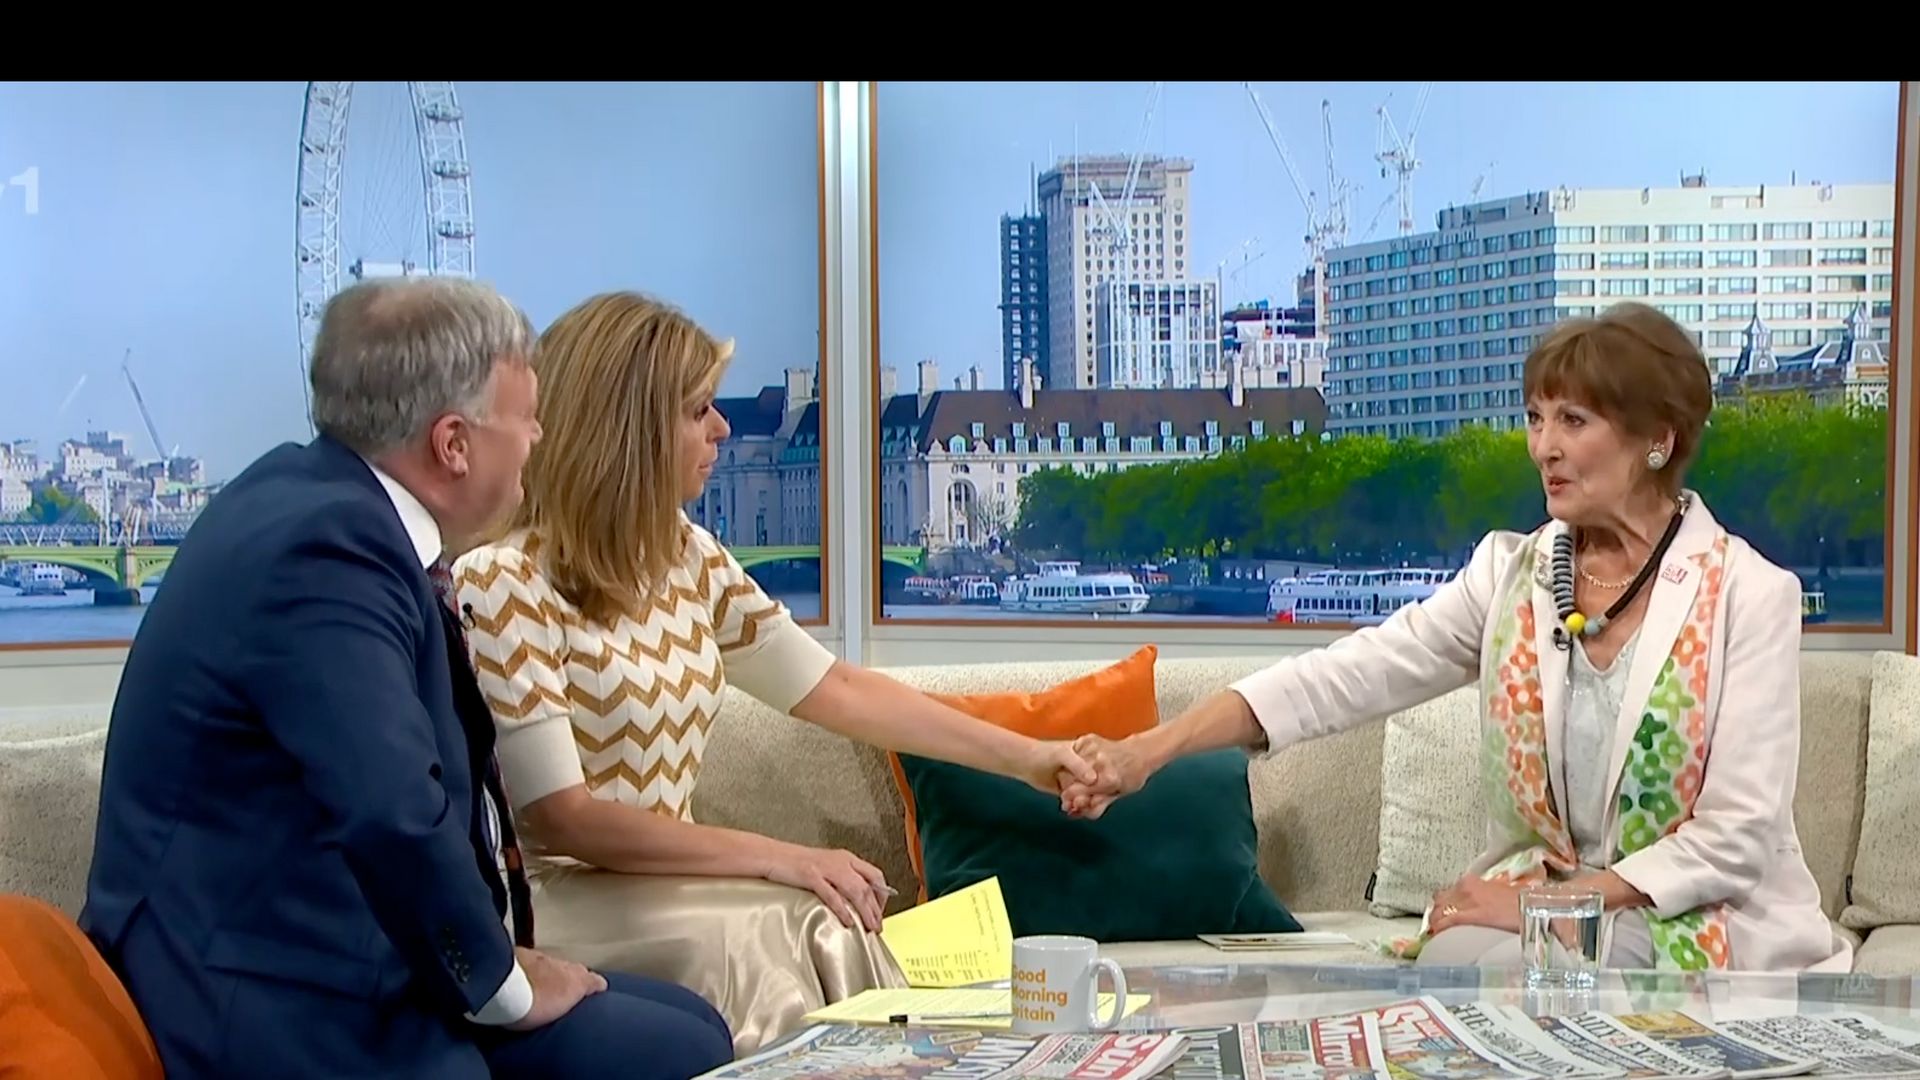 Kate Garraway ‘not going to cry’ as she shares devastating onscreen moment over loss of husband Derek